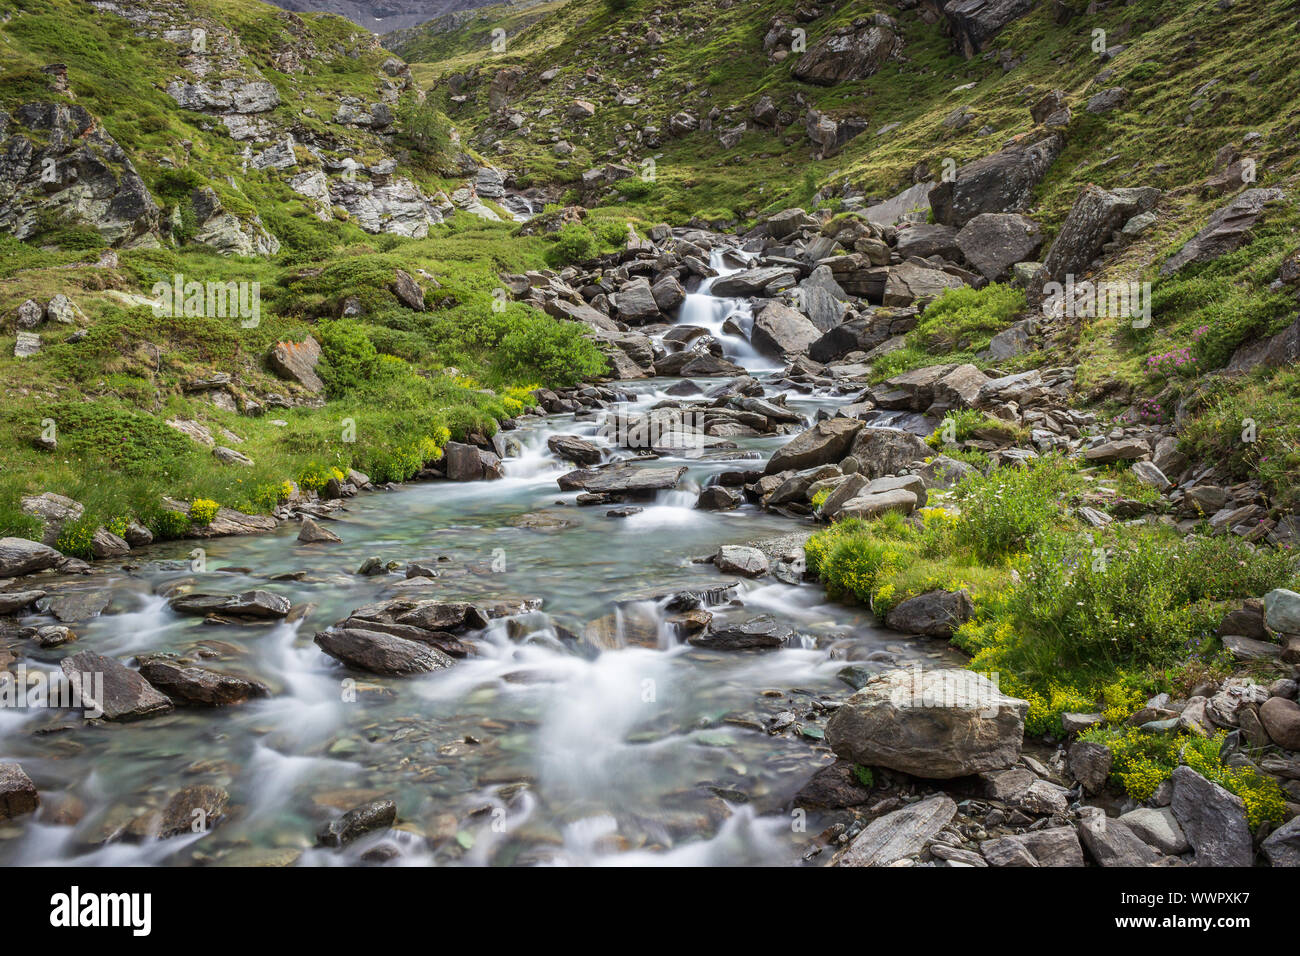 Hiking trail in Aosta valley with wild mountain stream landscape. Long exposure shot. Stock Photo